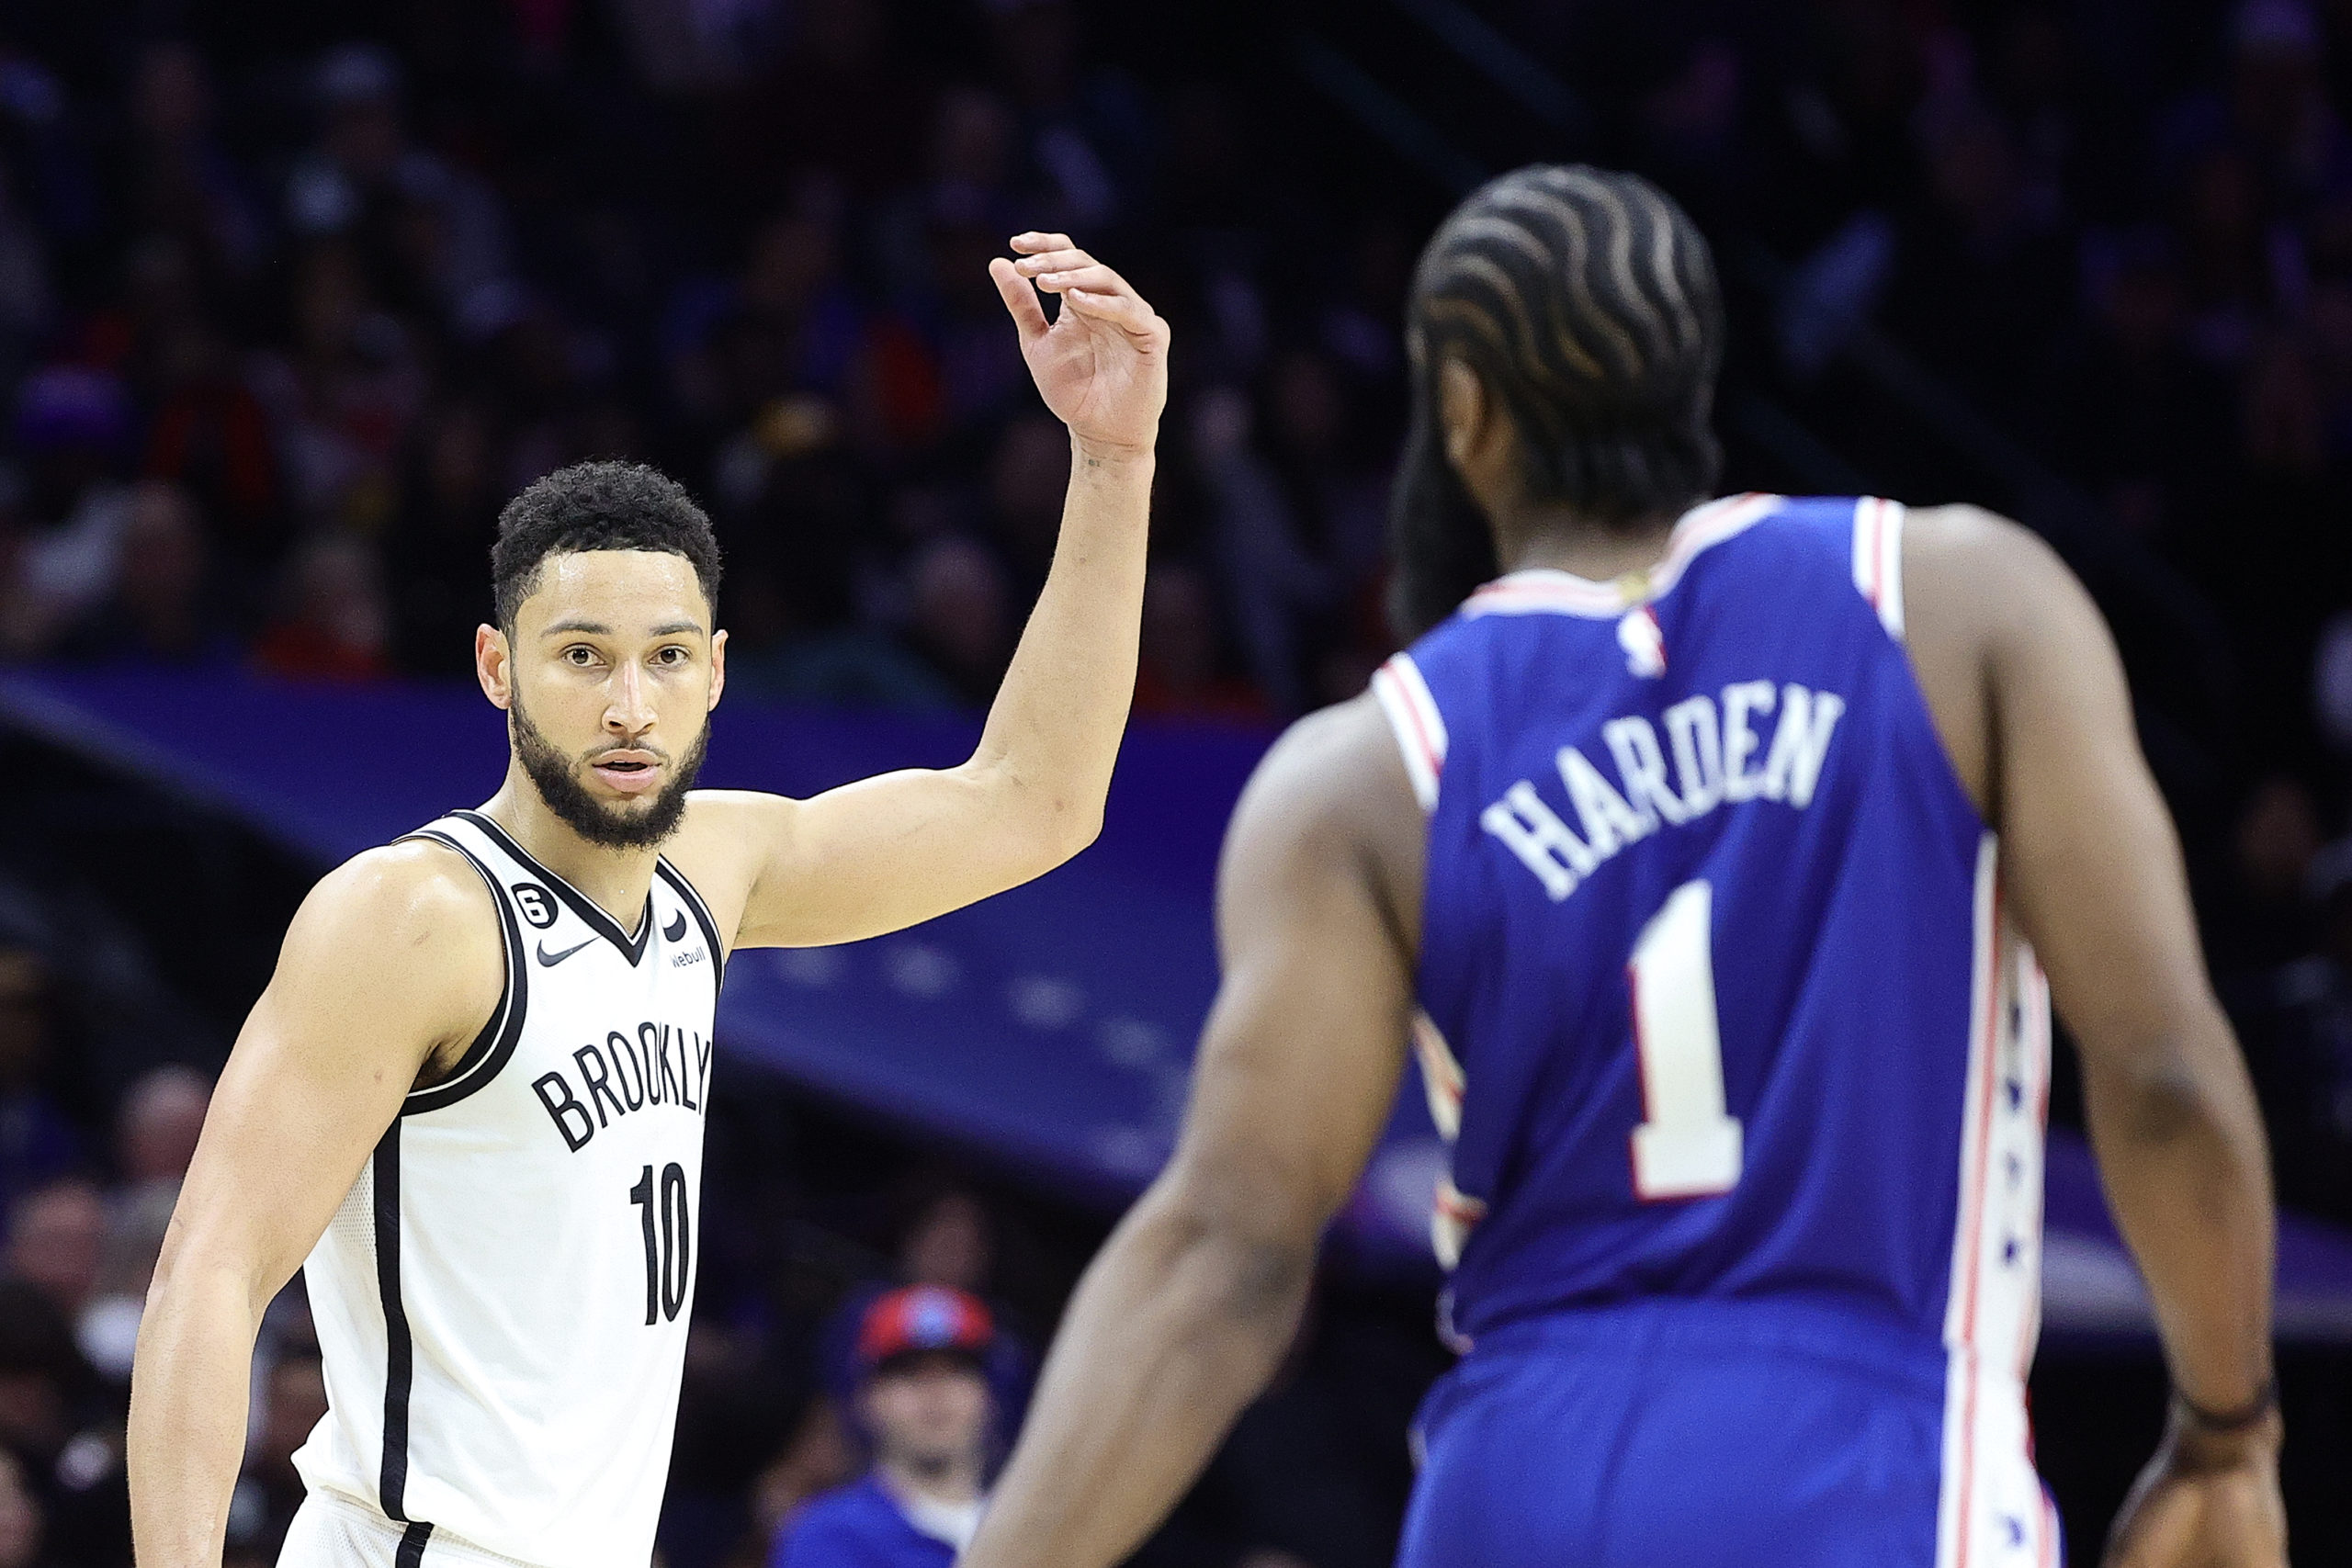 PHILADELPHIA, PENNSYLVANIA - JANUARY 25: Ben Simmons #10 of the Brooklyn Nets gestures during the fourth quarter against the Philadelphia 76ers at Wells Fargo Center on January 25, 2023 in Philadelphia, Pennsylvania. Tim Nwachukwu/Getty Images